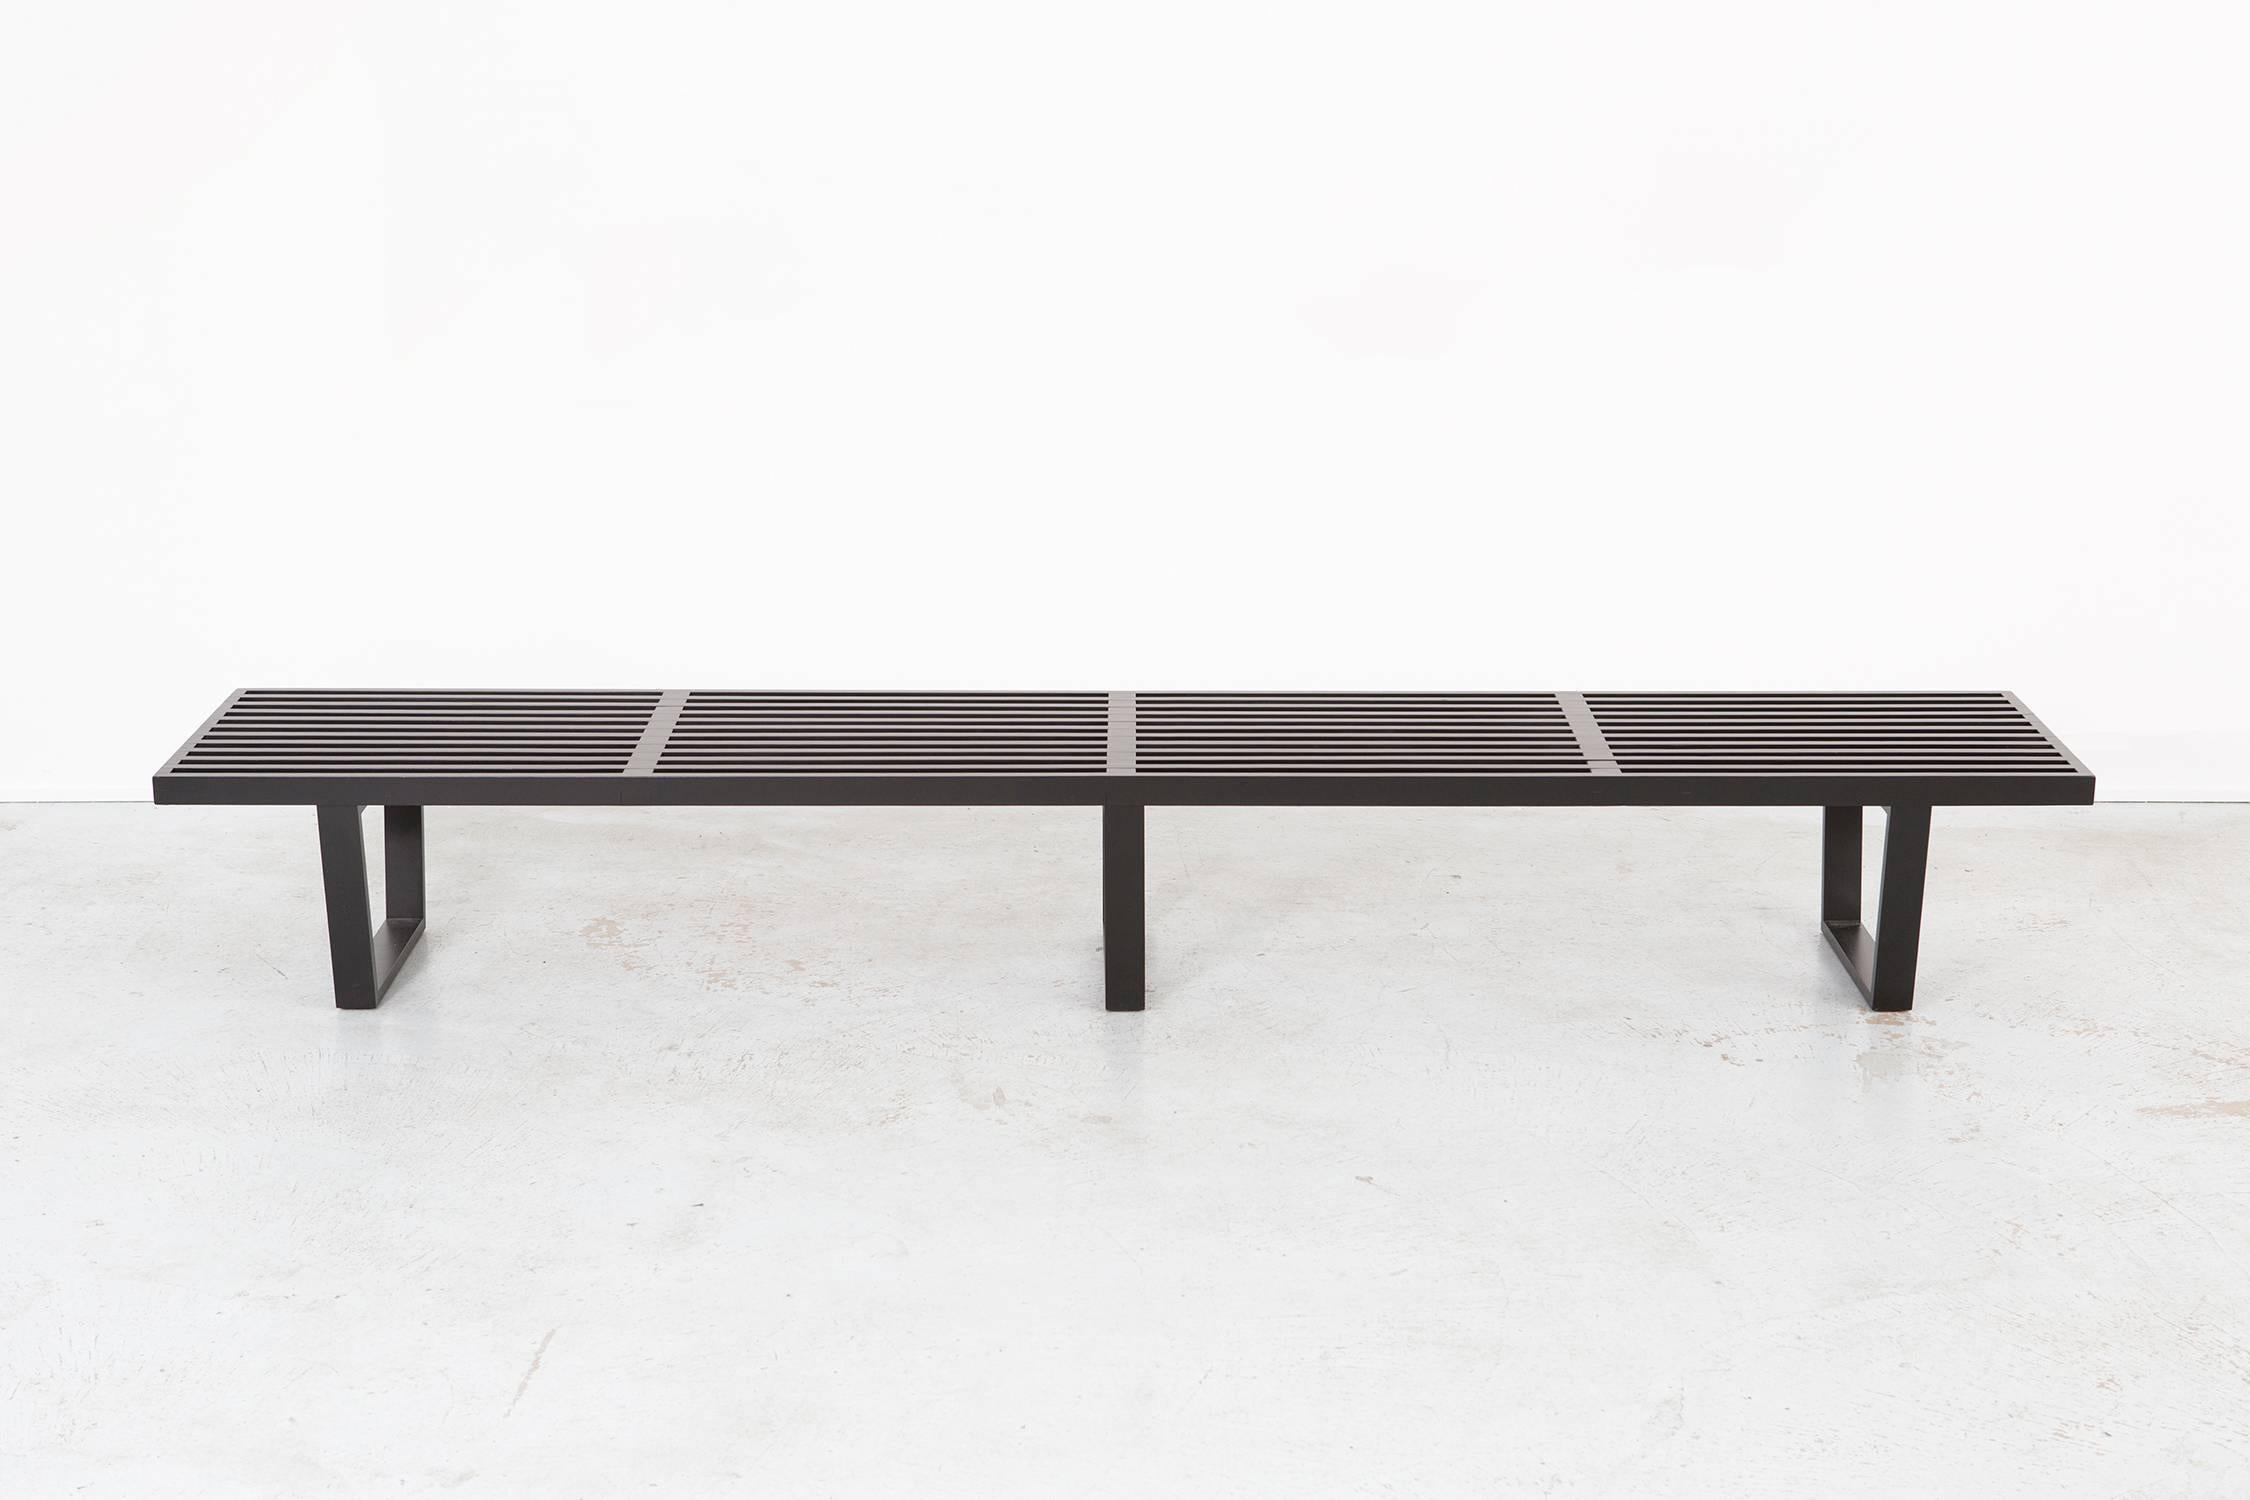 Bench

Designed by George nelson for Herman Miller

USA, circa 1960s

ebonized wood

Measures: 14” H x 102” W x 18 ½” D x seat 18 ½” H.